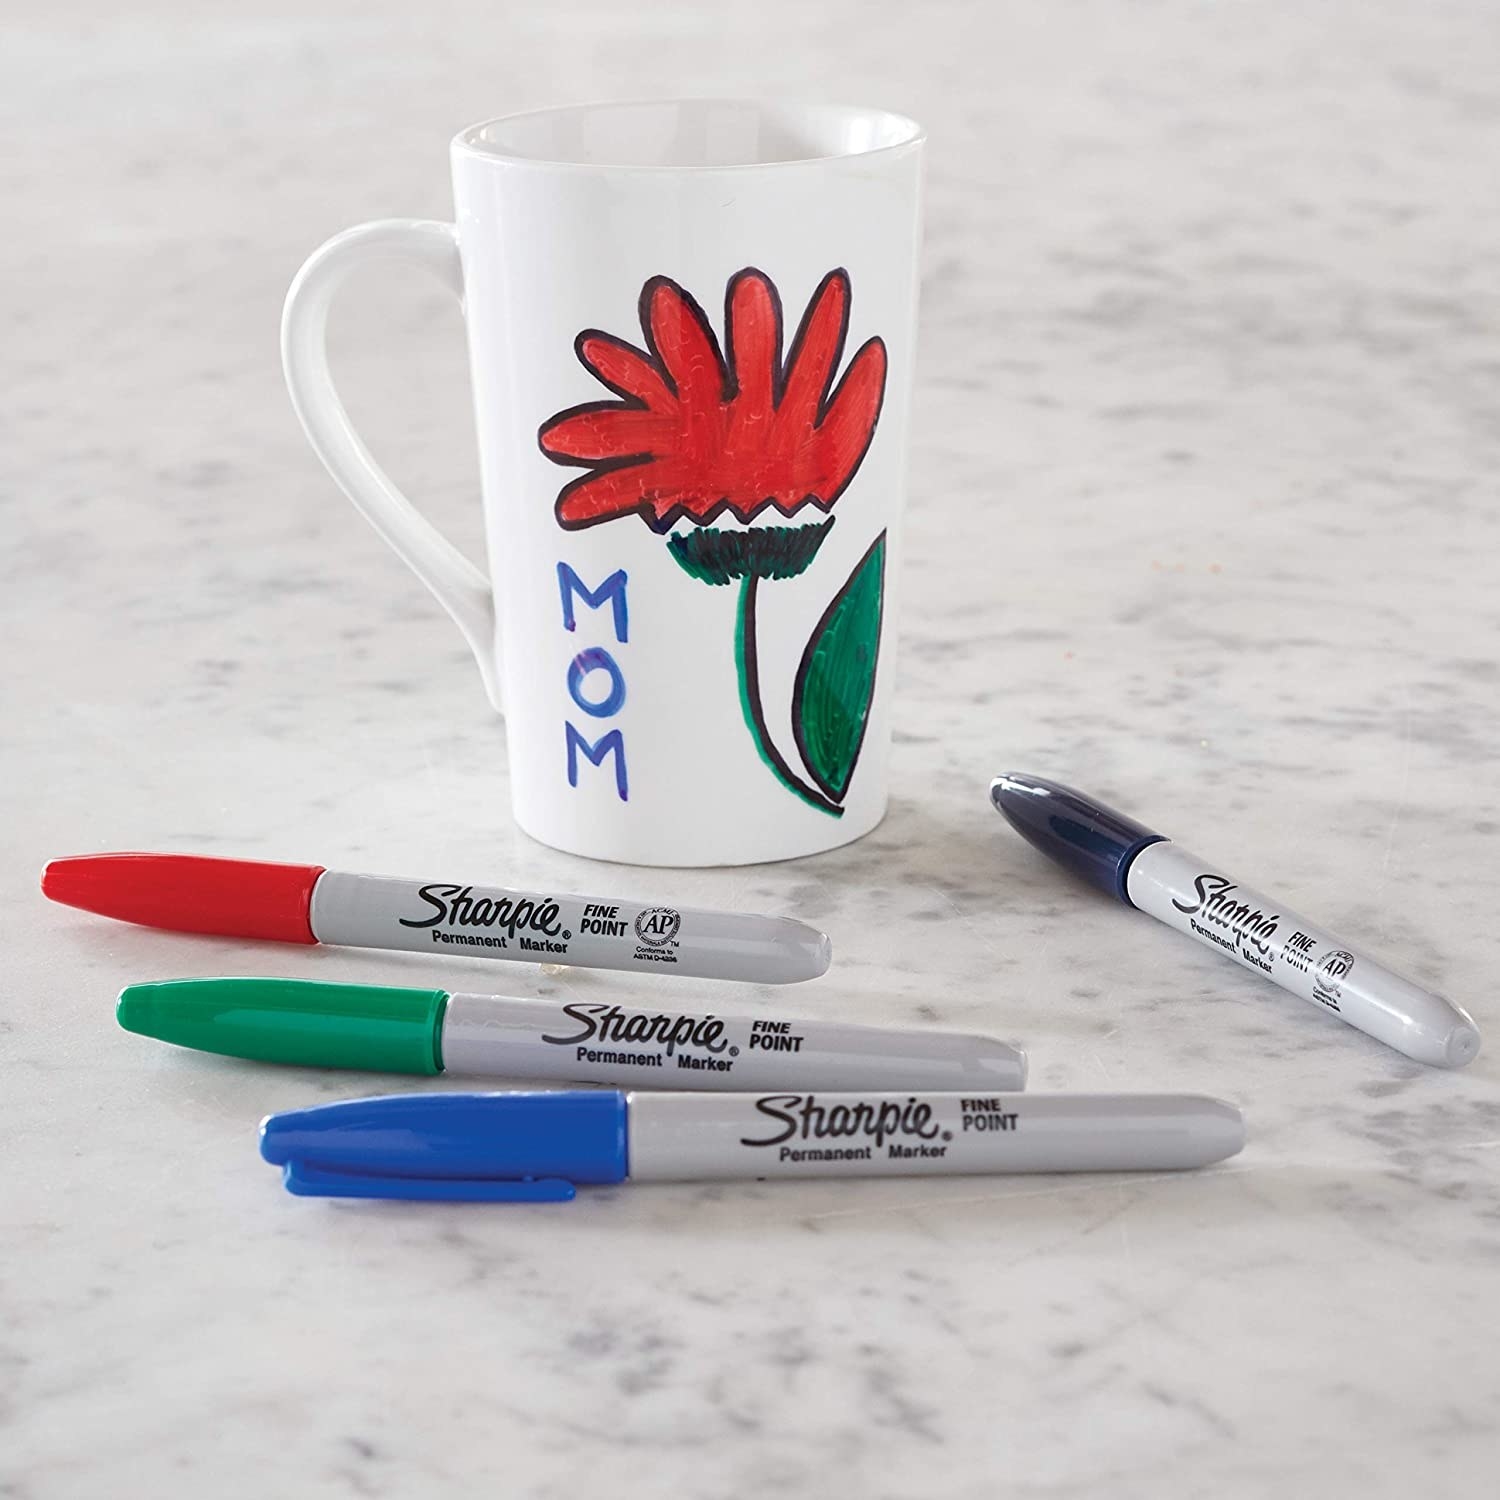 Sharpies surrounding a mug on a marble counter